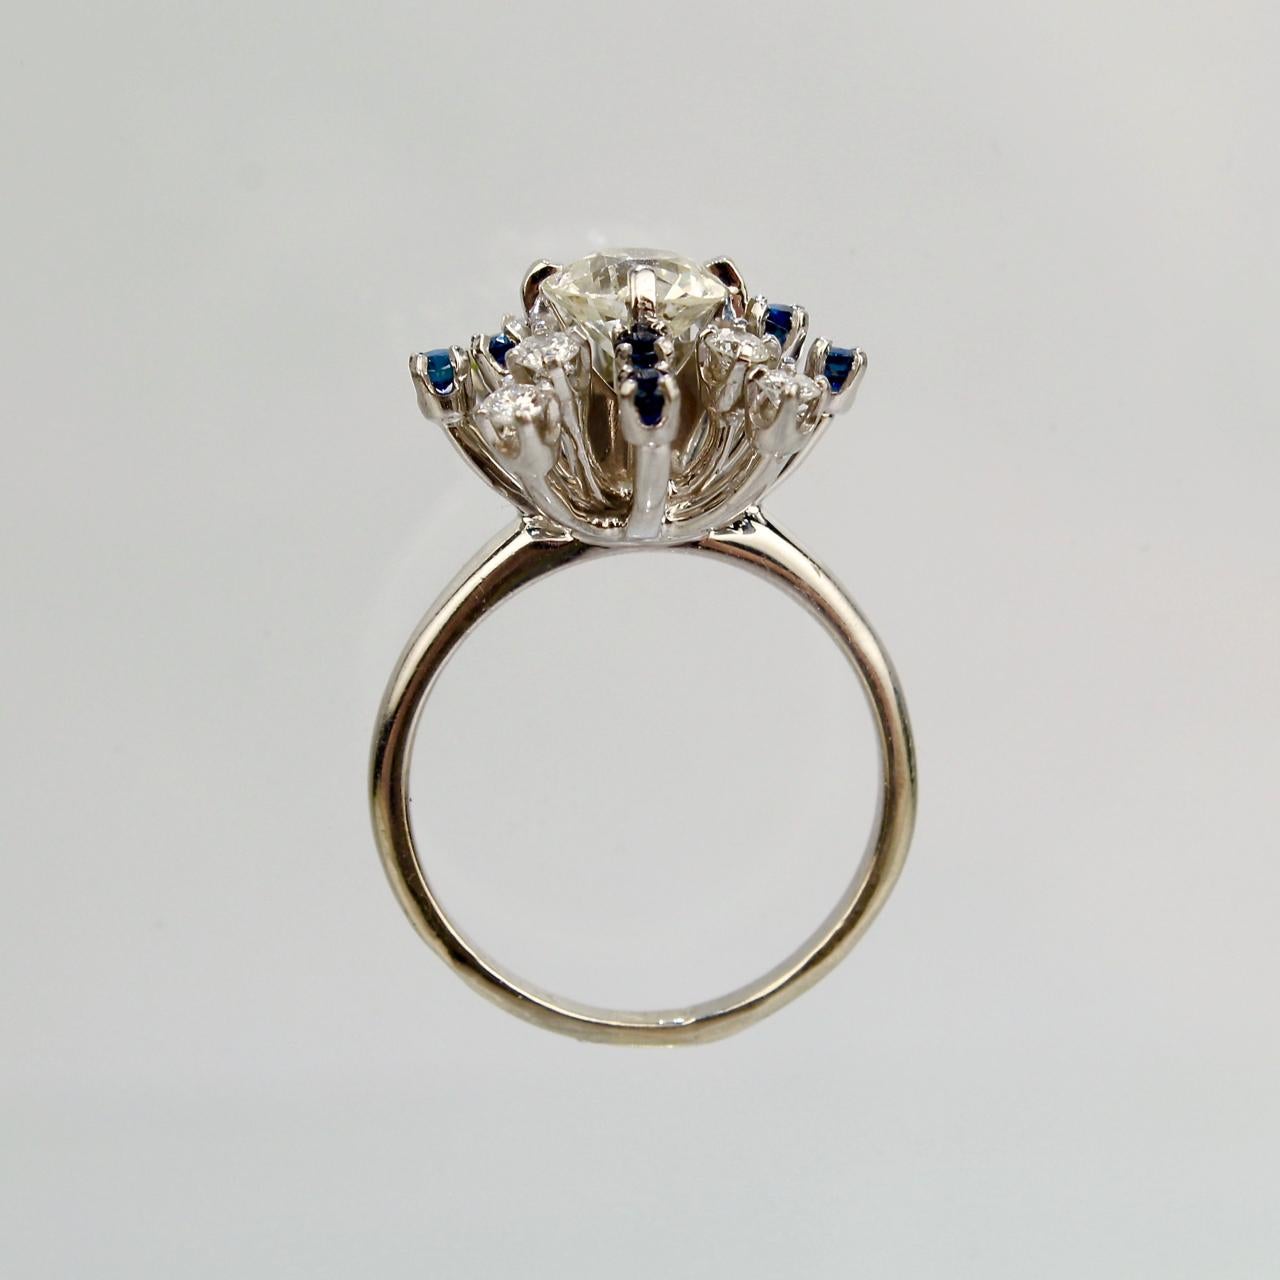 Signed Mid-Century Modern 14K Gold, Diamond, & Sapphire Starburst Cocktail Ring In Good Condition For Sale In Philadelphia, PA